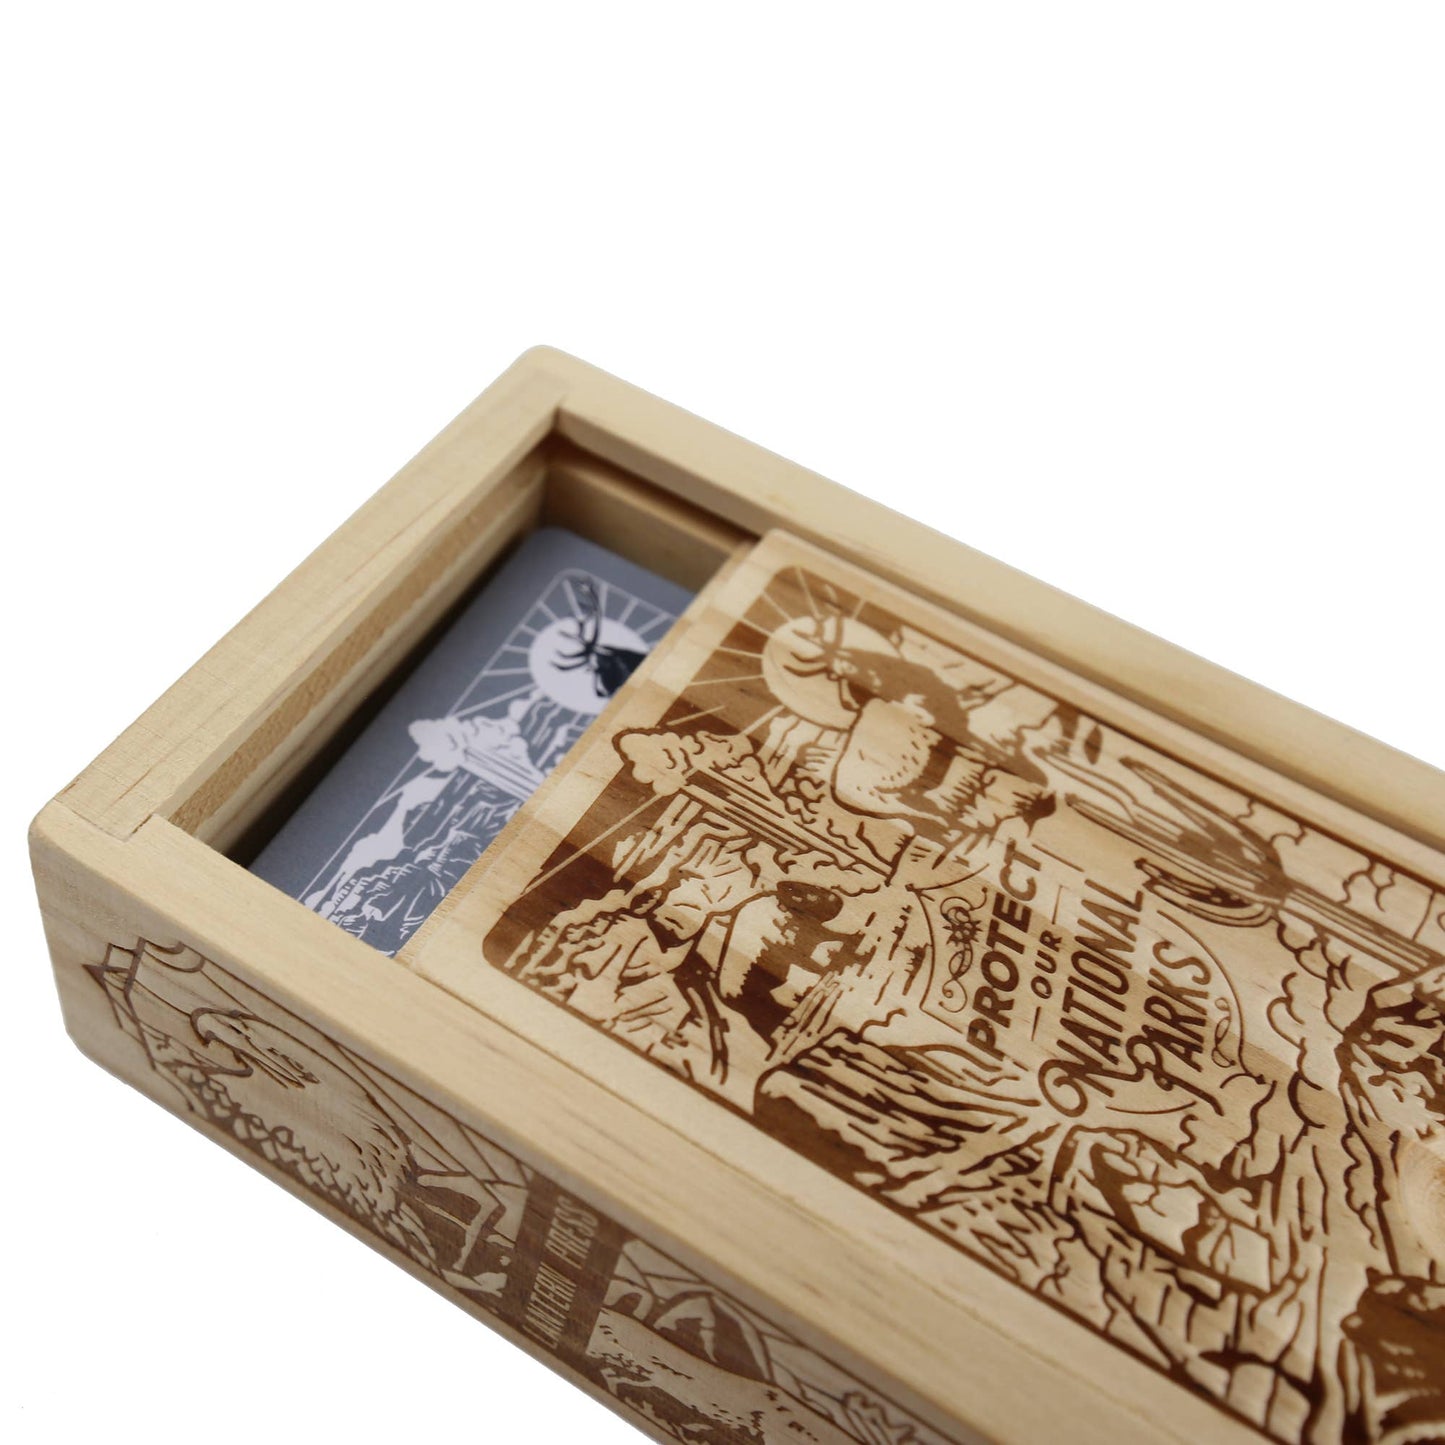 Playing Cards Wood Box Set - Protect Our National Parks